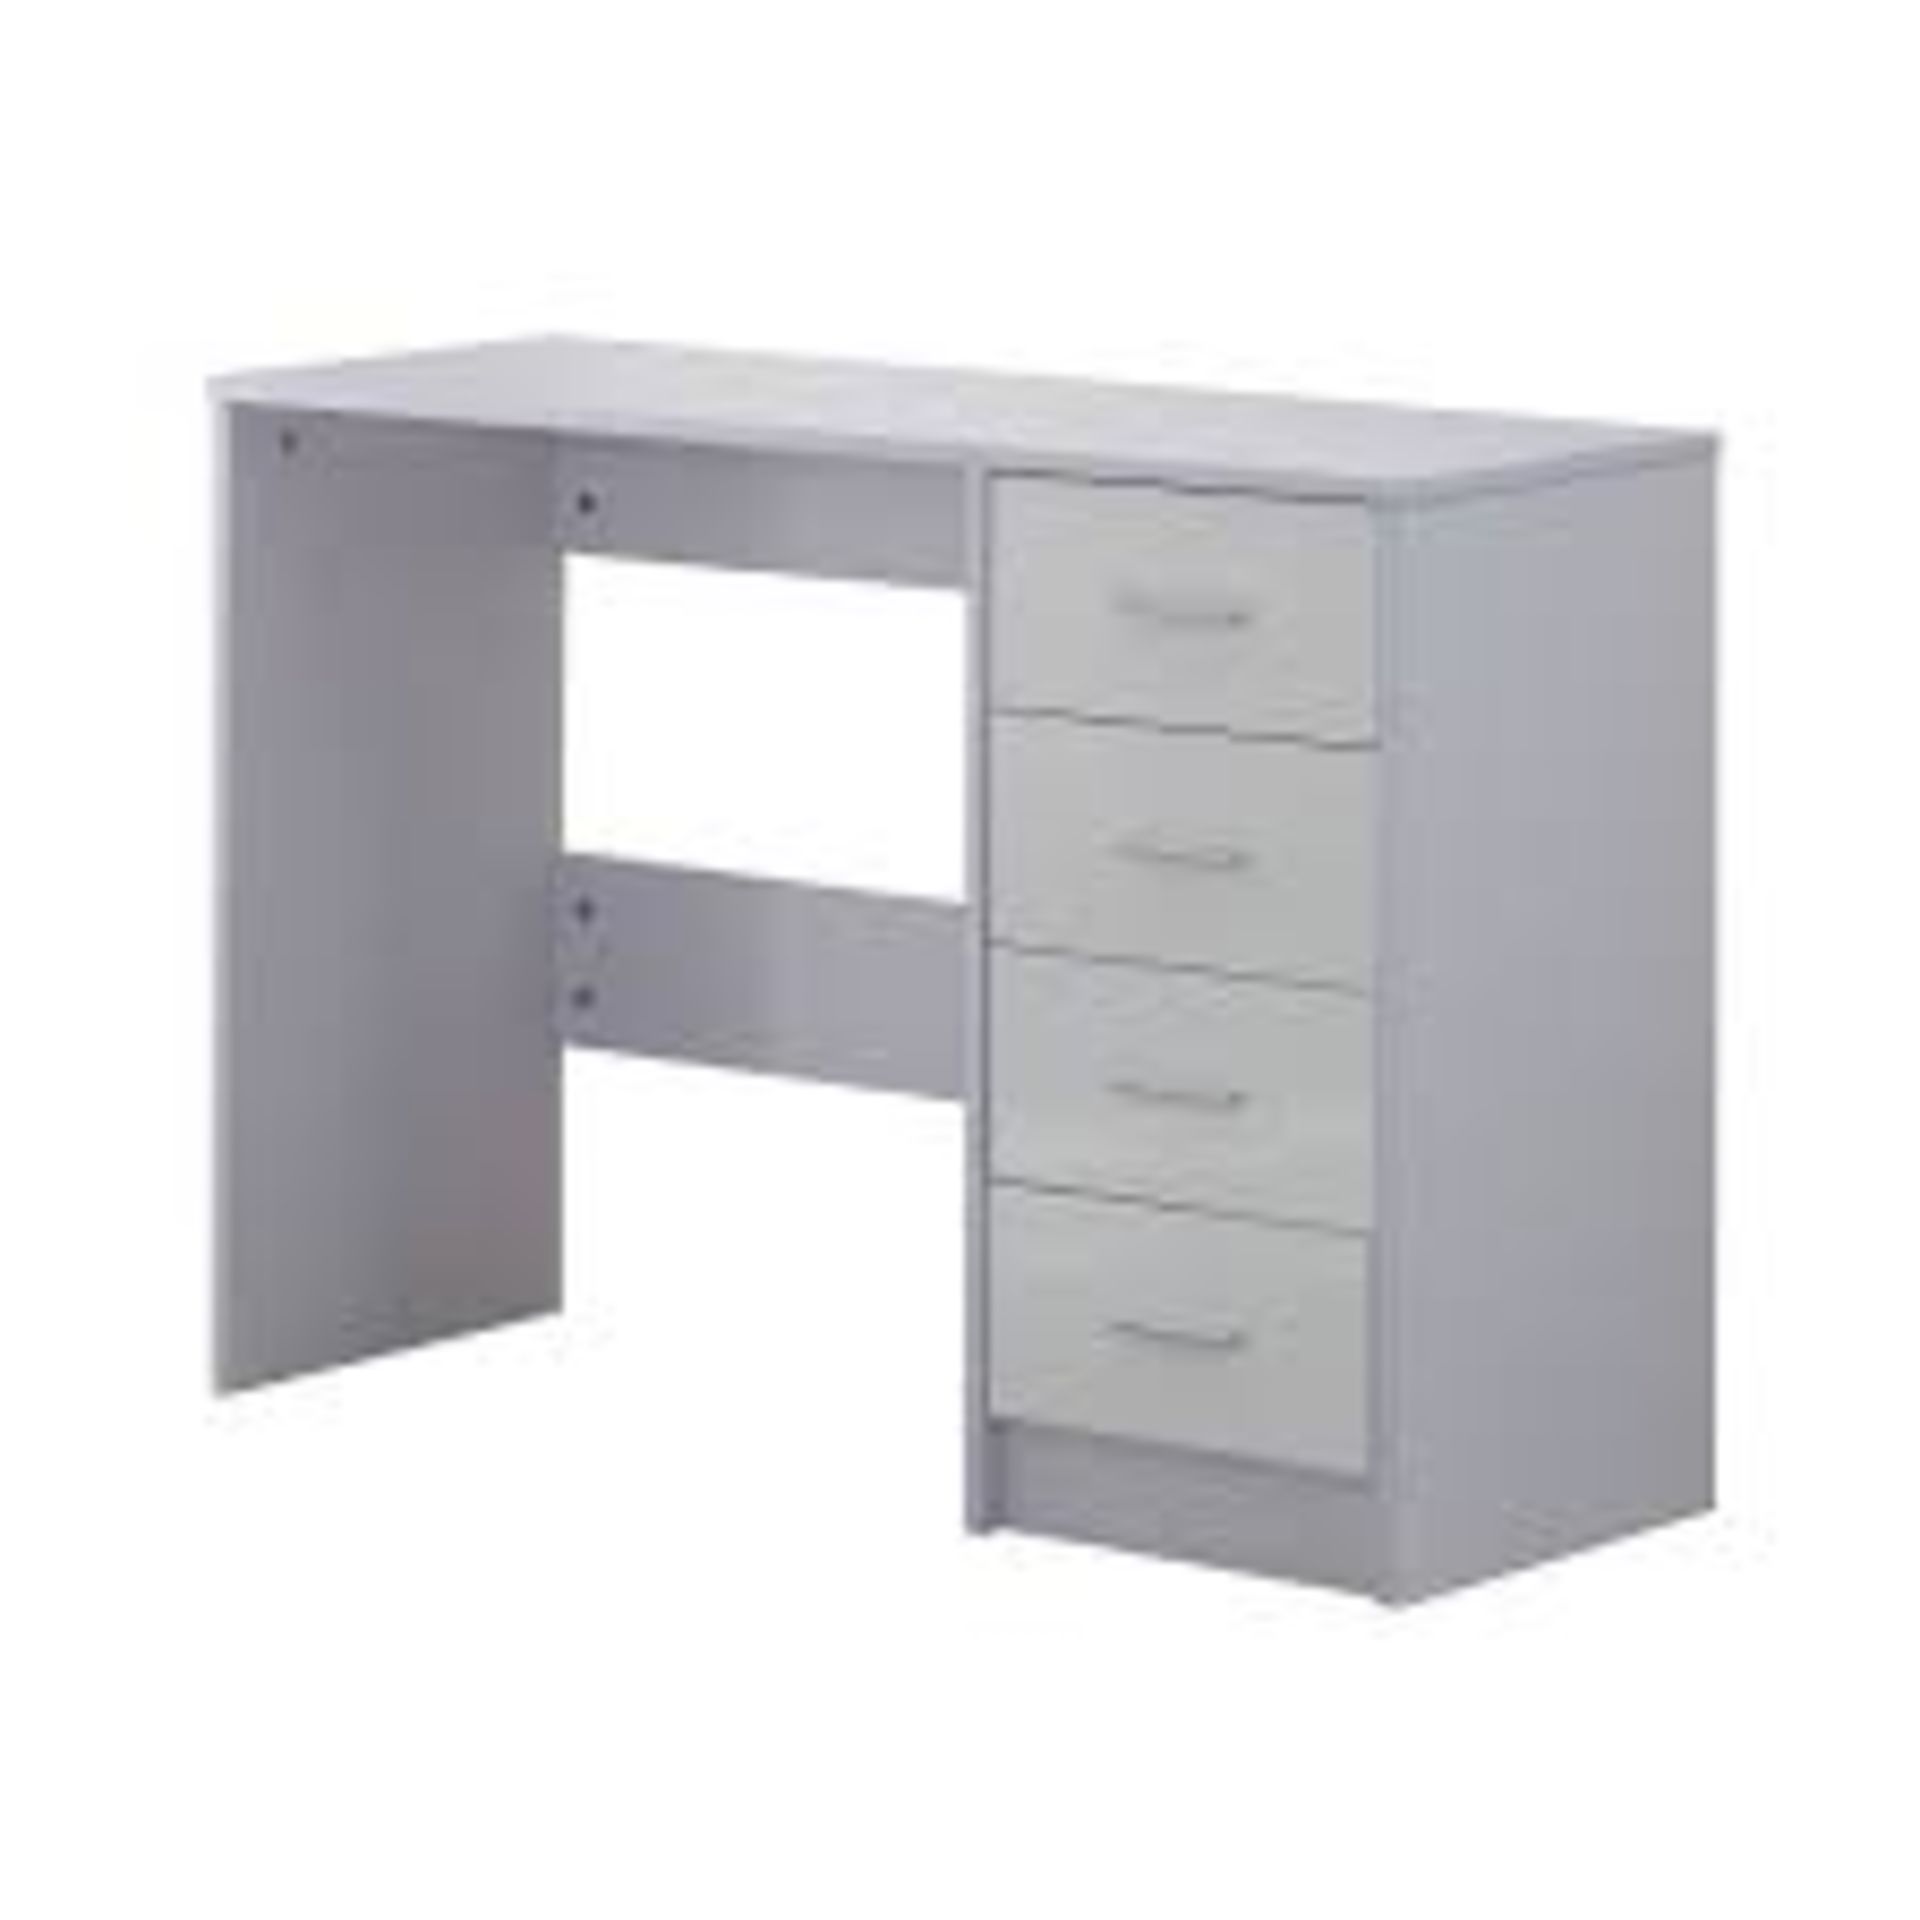 Boxed Randolph Desk RRP £80 (Pictures Are For Illustration Purposes Only) (Appraisals Are